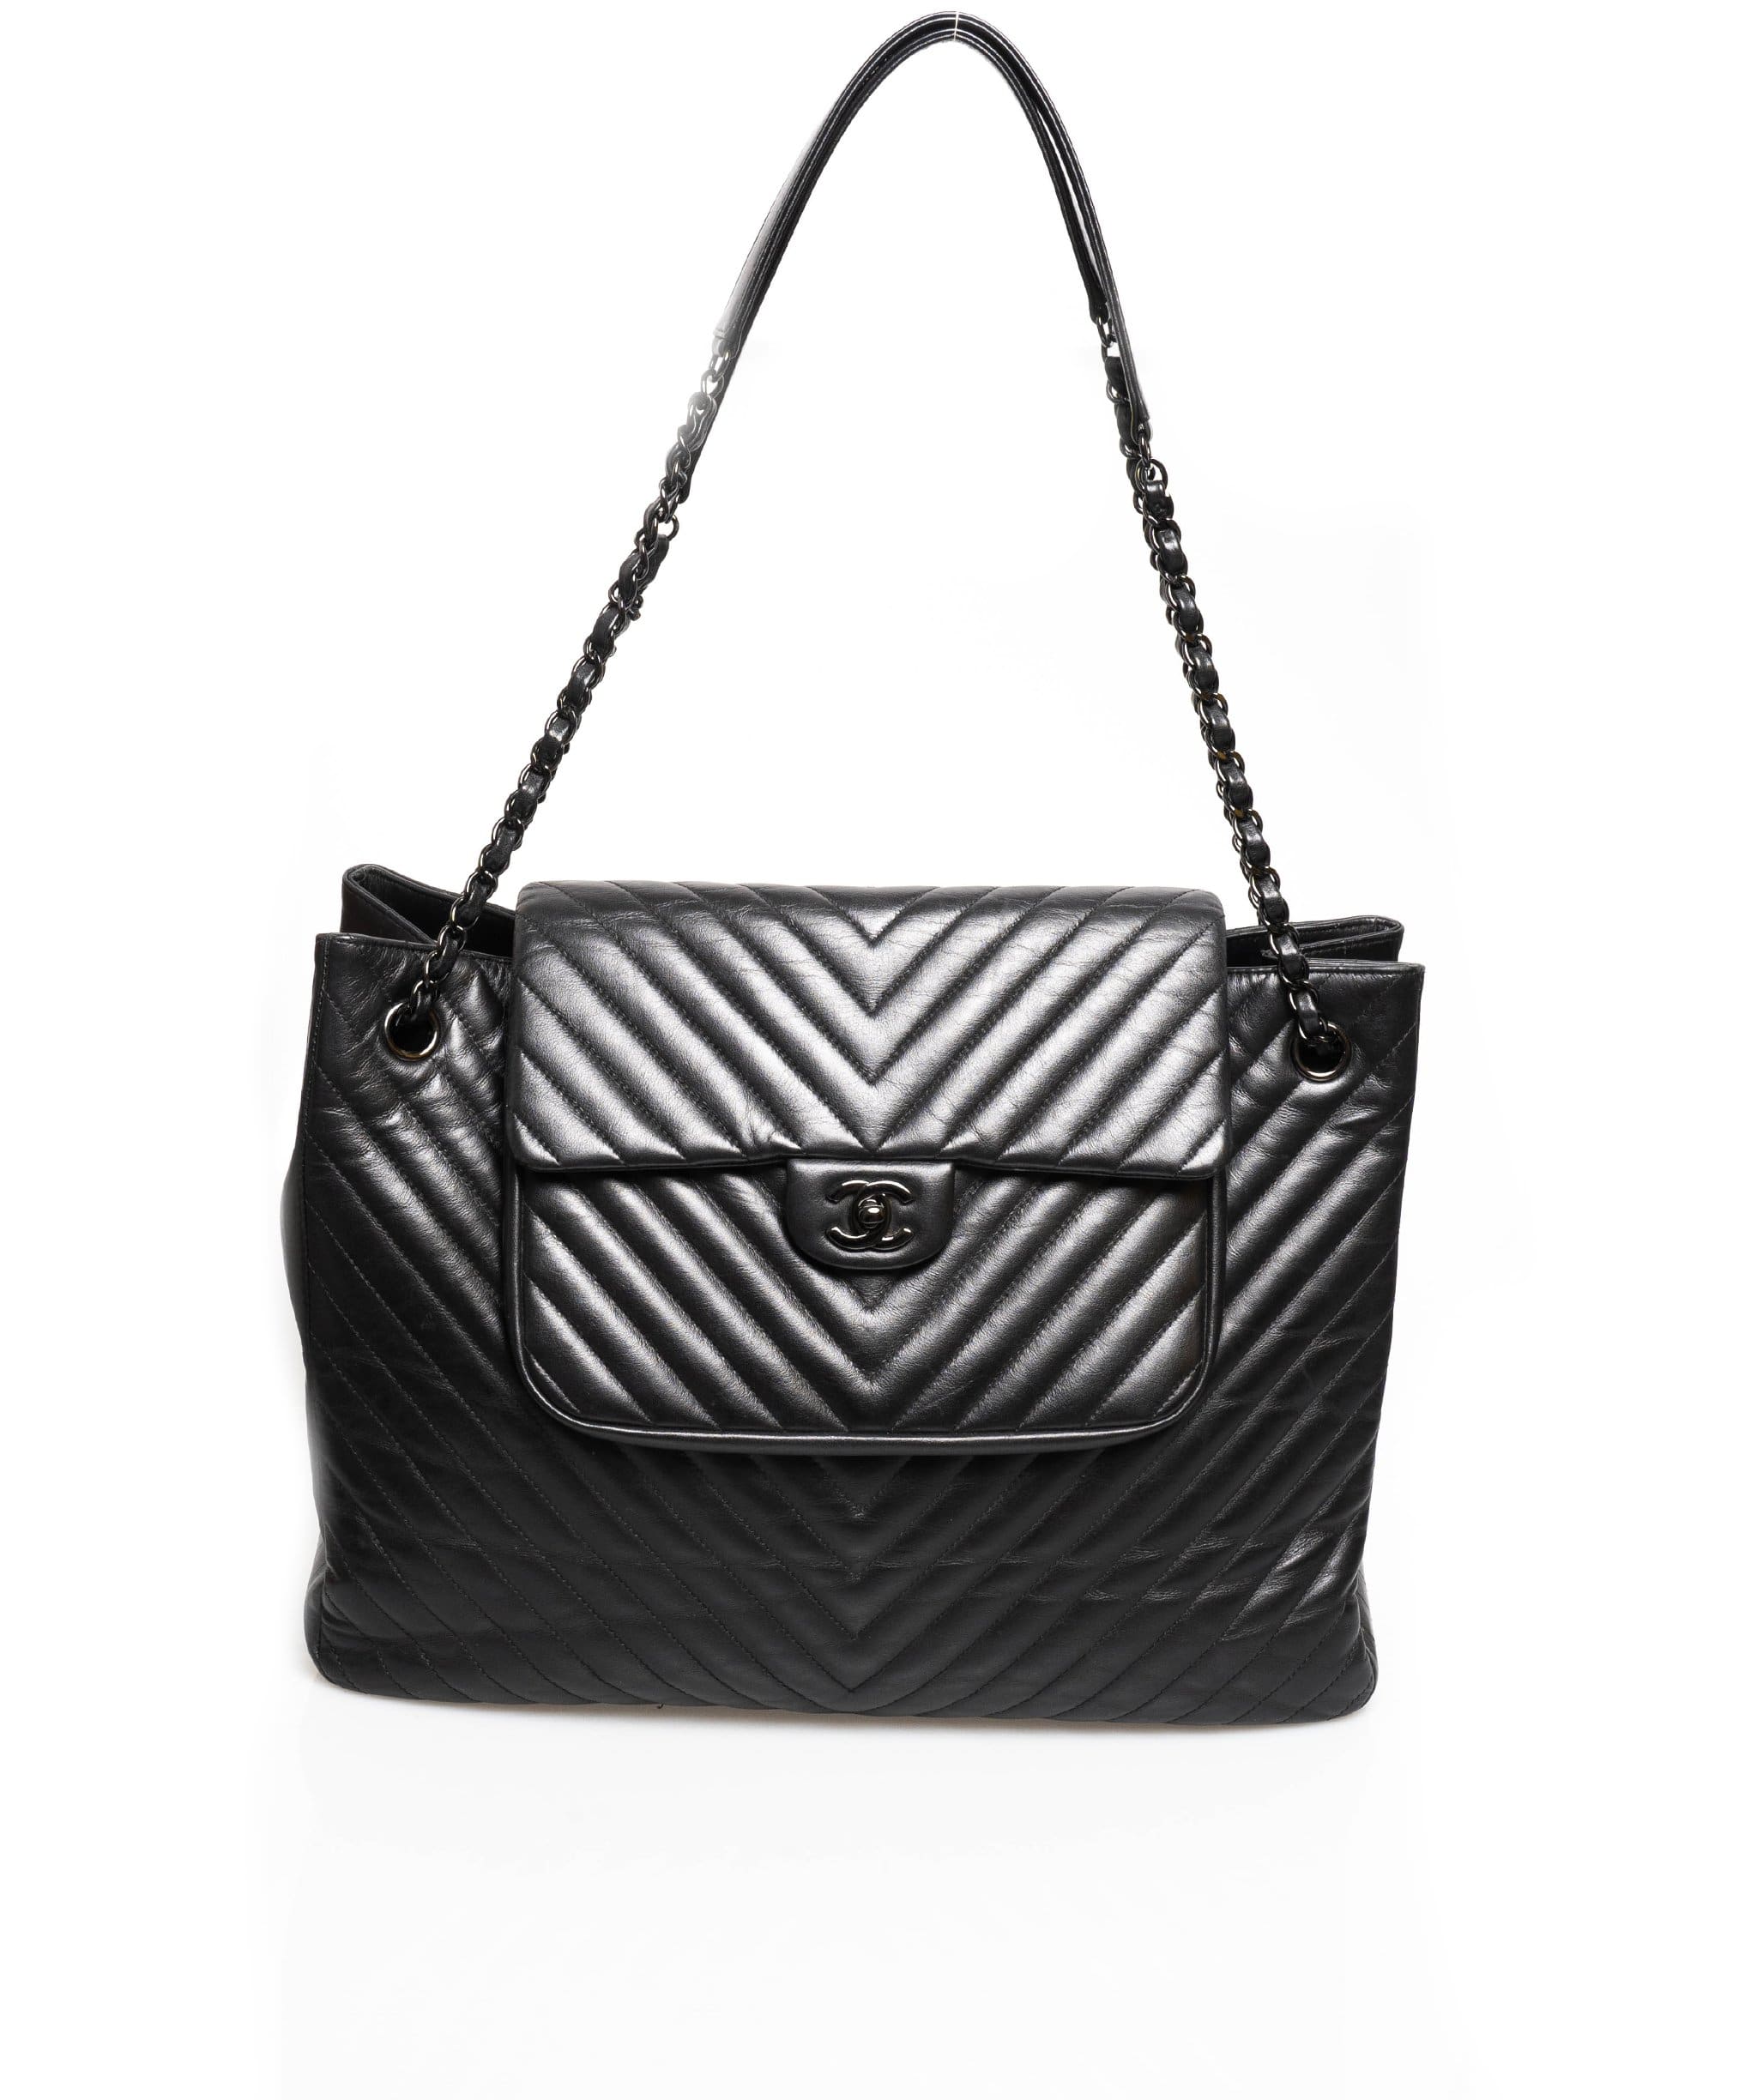 Chanel Chanel So Black Chevron Lambskin Leather Tote Bag NW3174